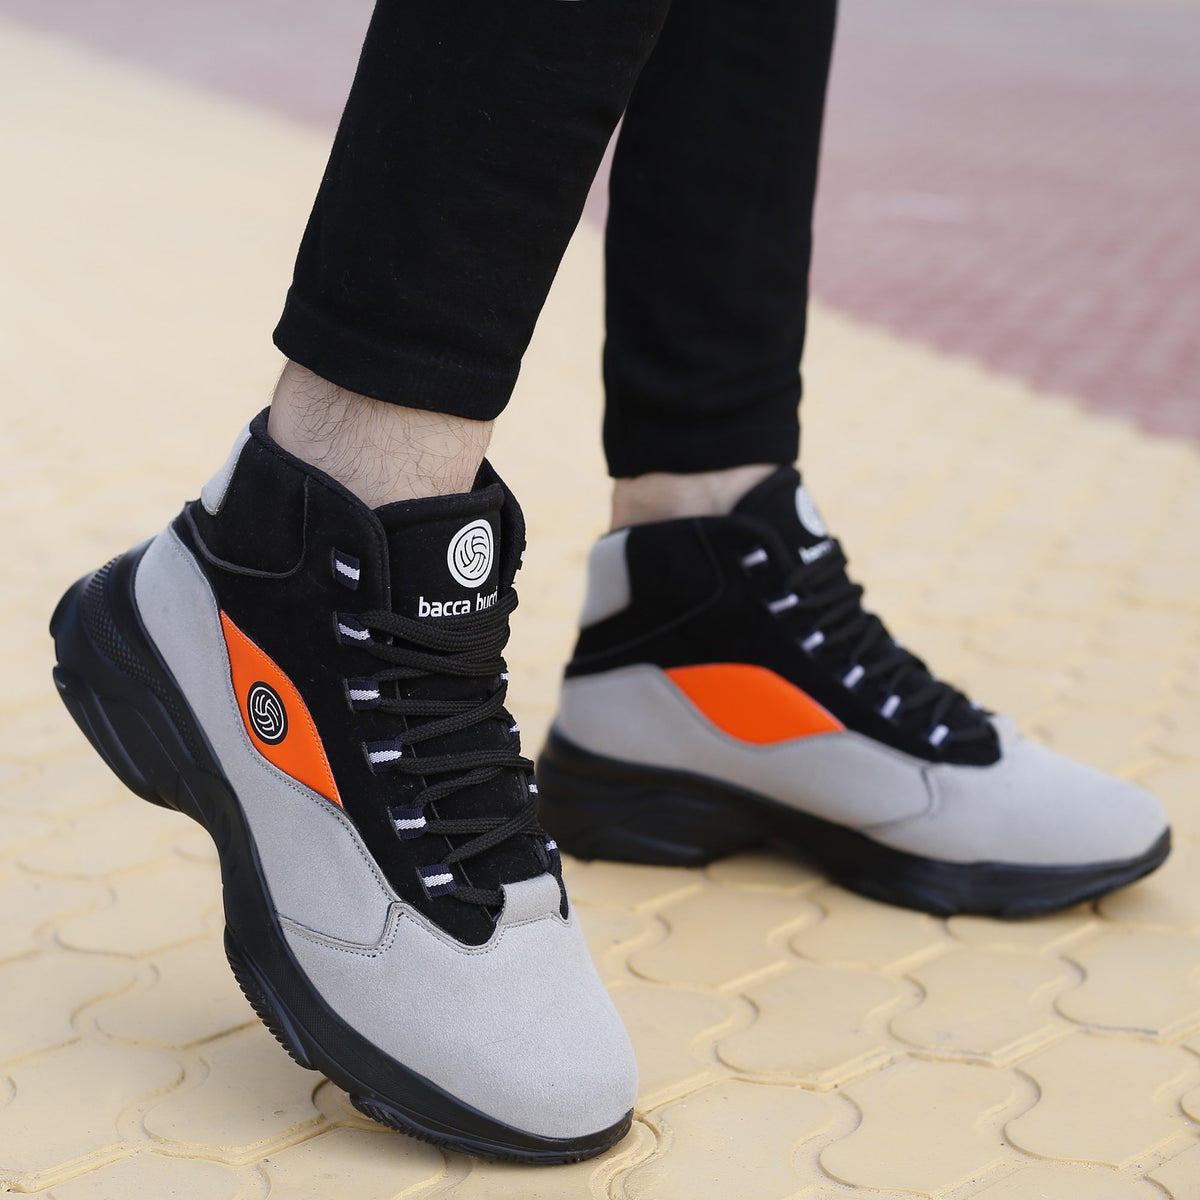 high ankle sneakers for men, mid ankle sneakers, casual shoes for men, ankle shoes for men, ankle shoes, hi top sneakers for men, hi top sneakers, high top trainers